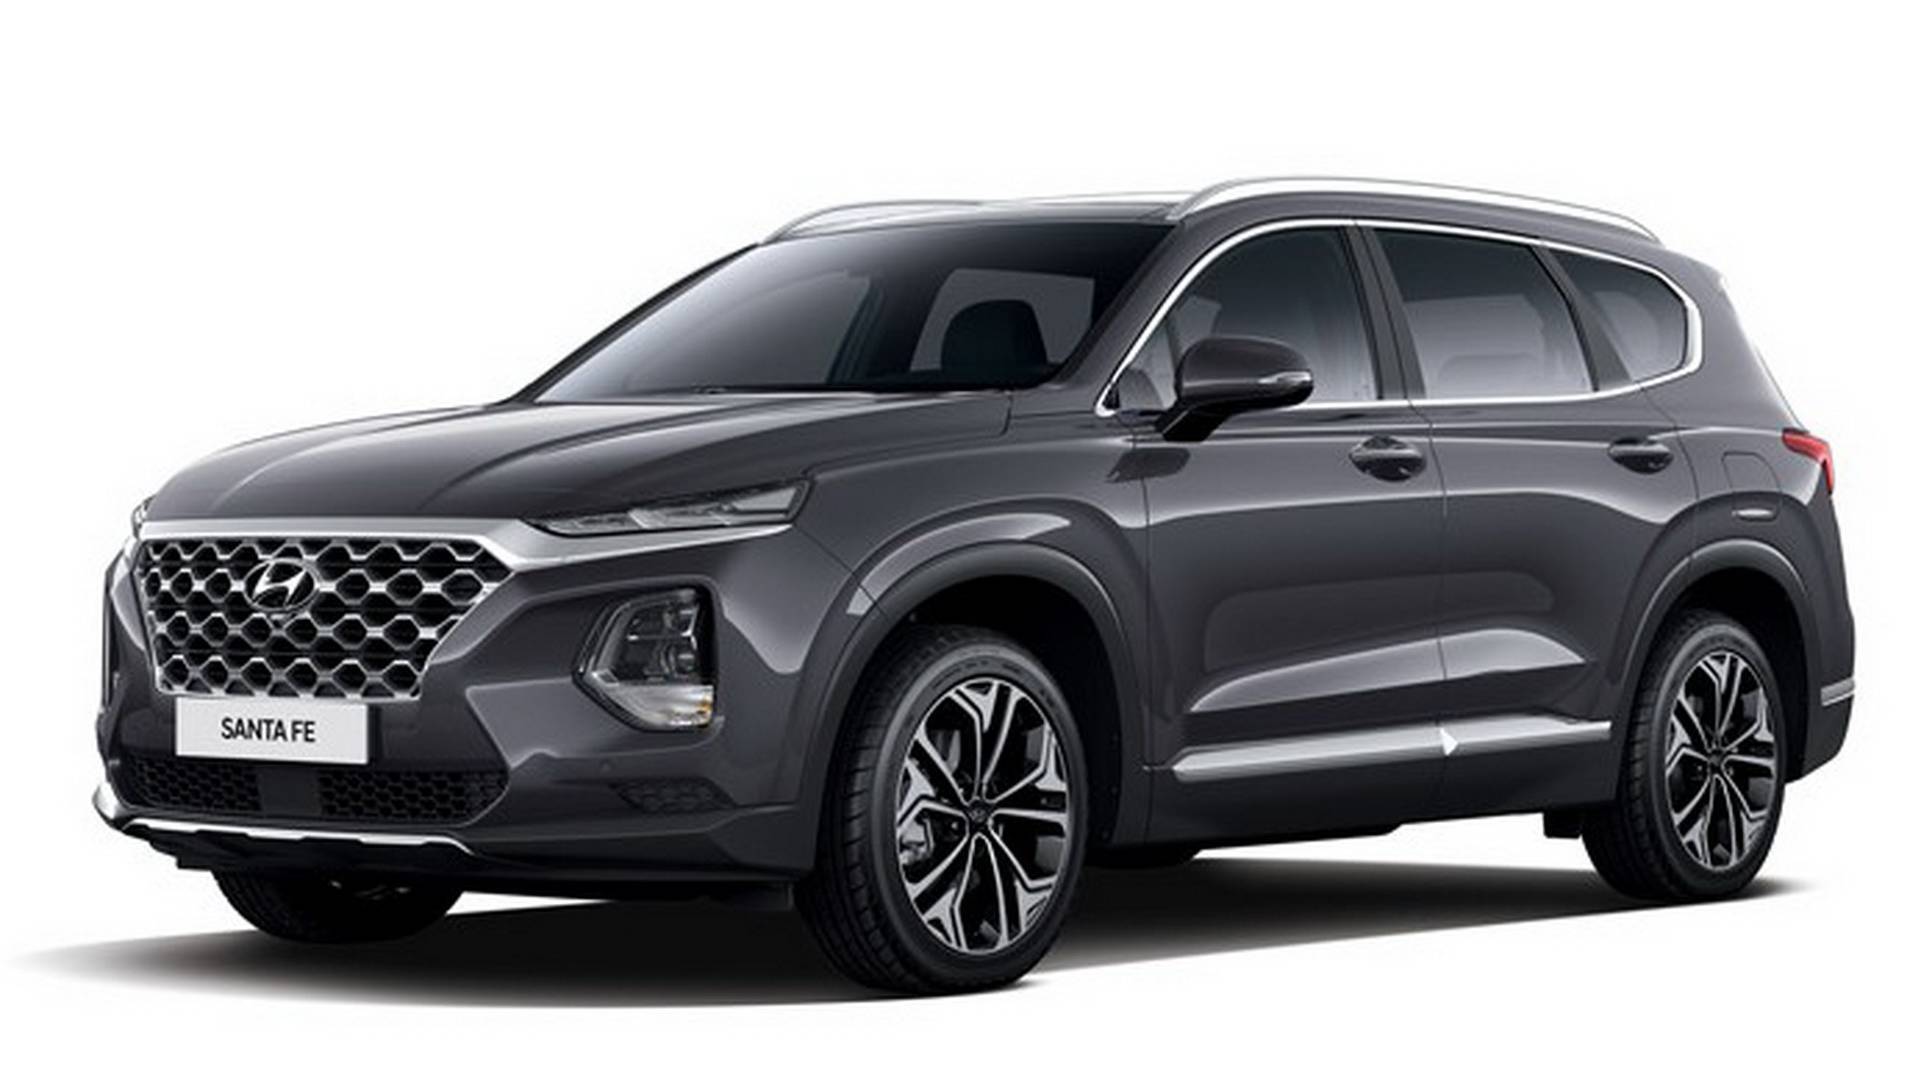 2019 Hyundai Santa Fe Looks Magnificent In New Official Photos And ...